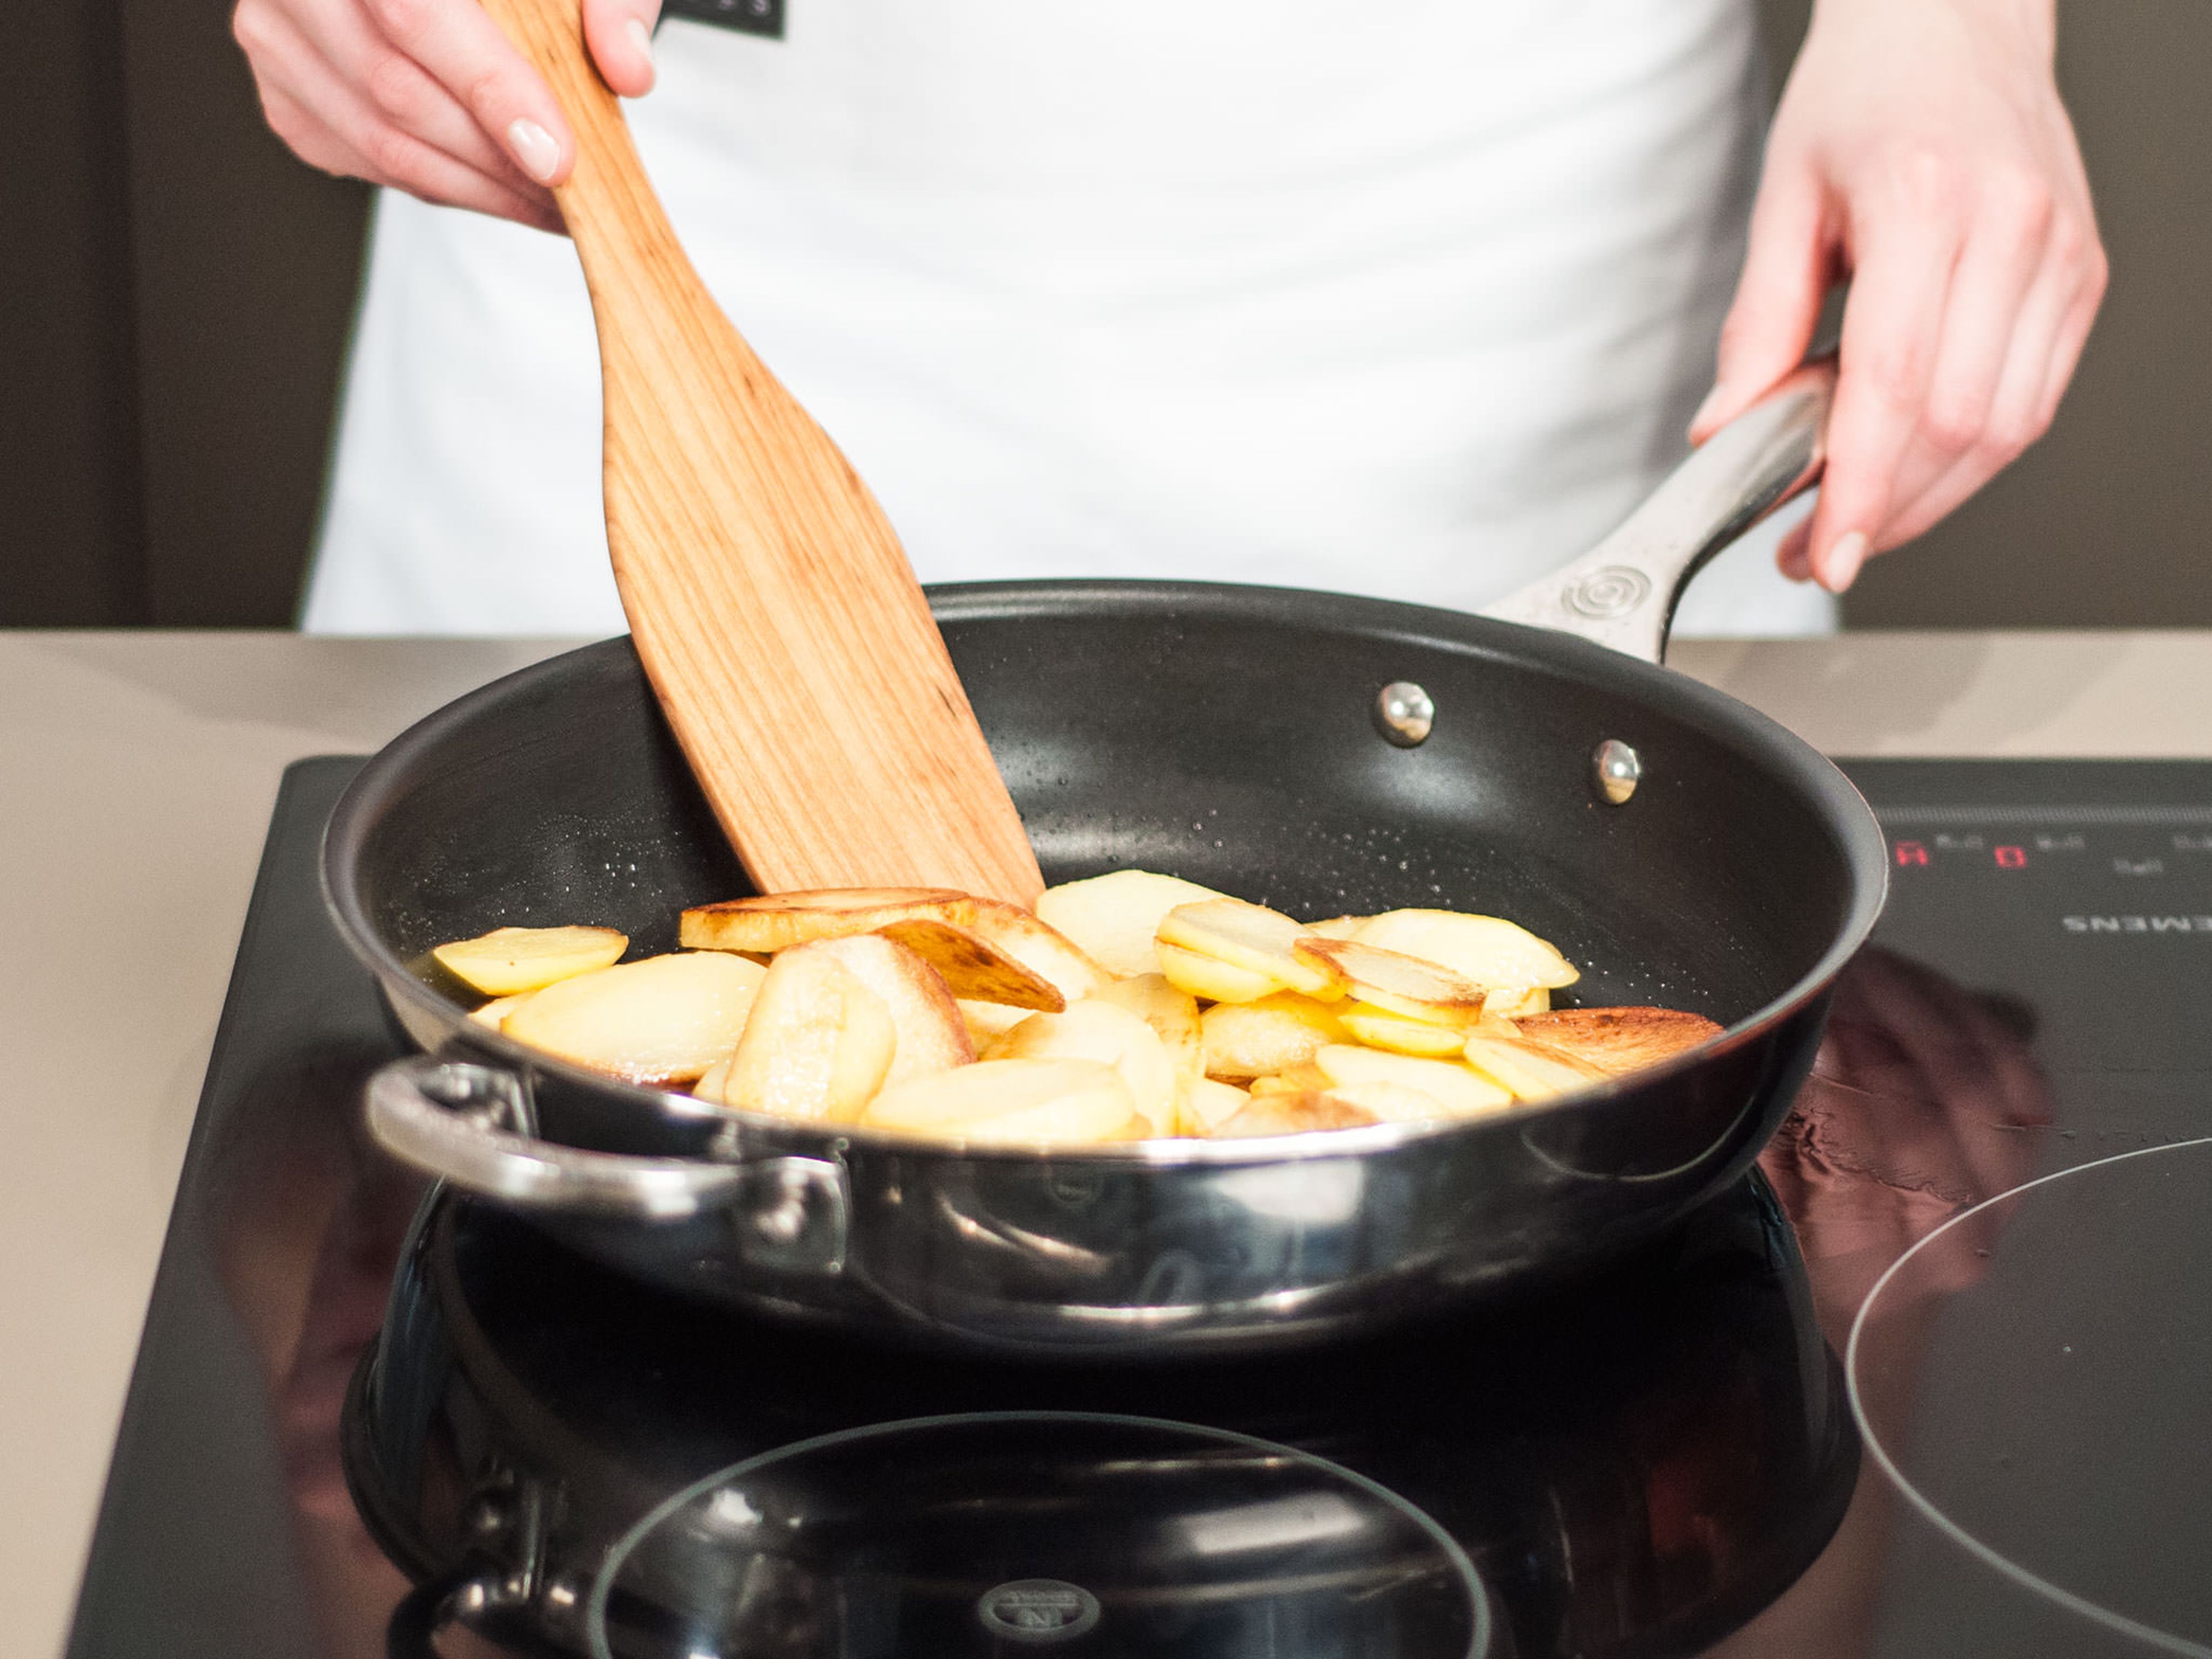 Heat a generous amount of vegetable oil in a frying pan over medium heat. Add potatoes and cook for approx. 10 - 11  min. until potatoes are cooked through. Remove excess oil.